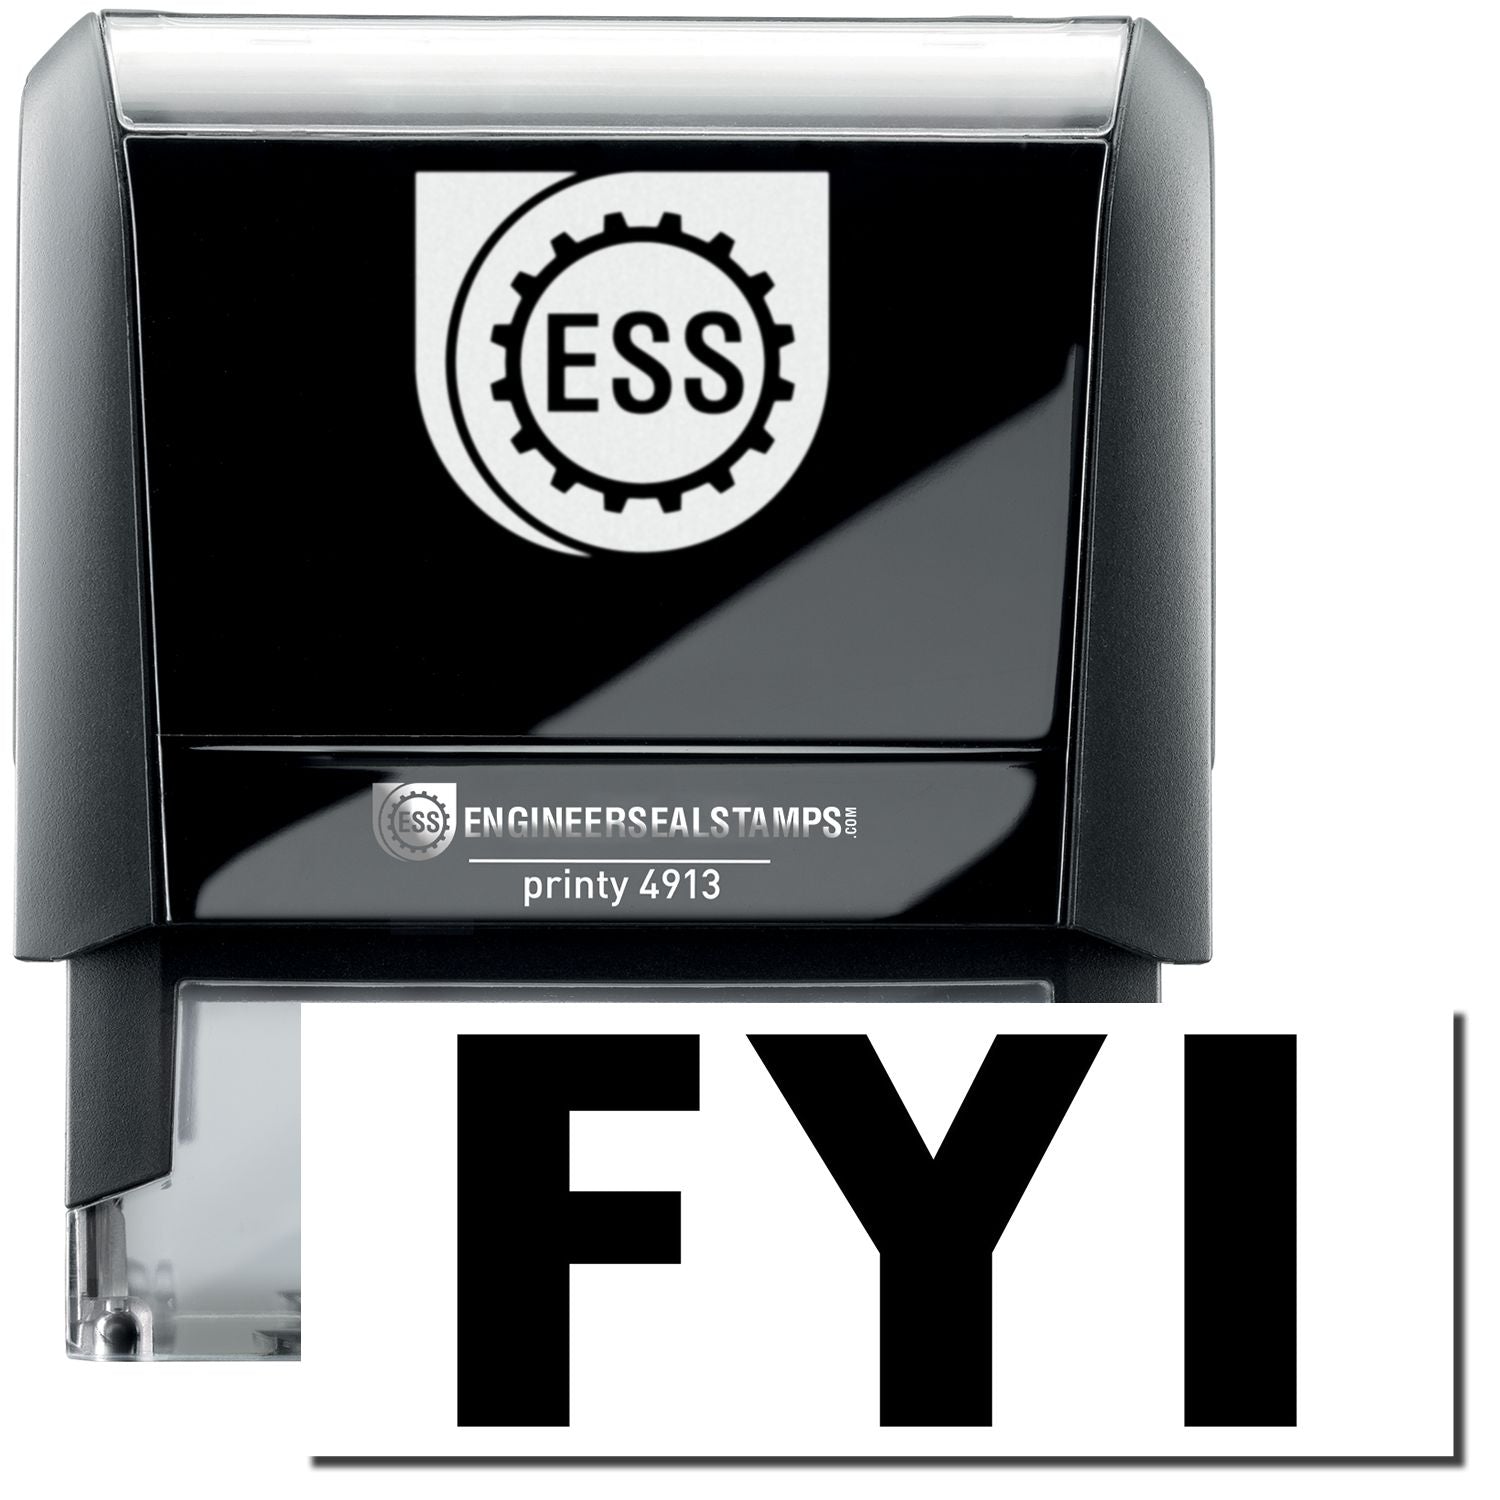 A self-inking stamp with a stamped image showing how the text "FYI" in a large bold font is displayed by it.